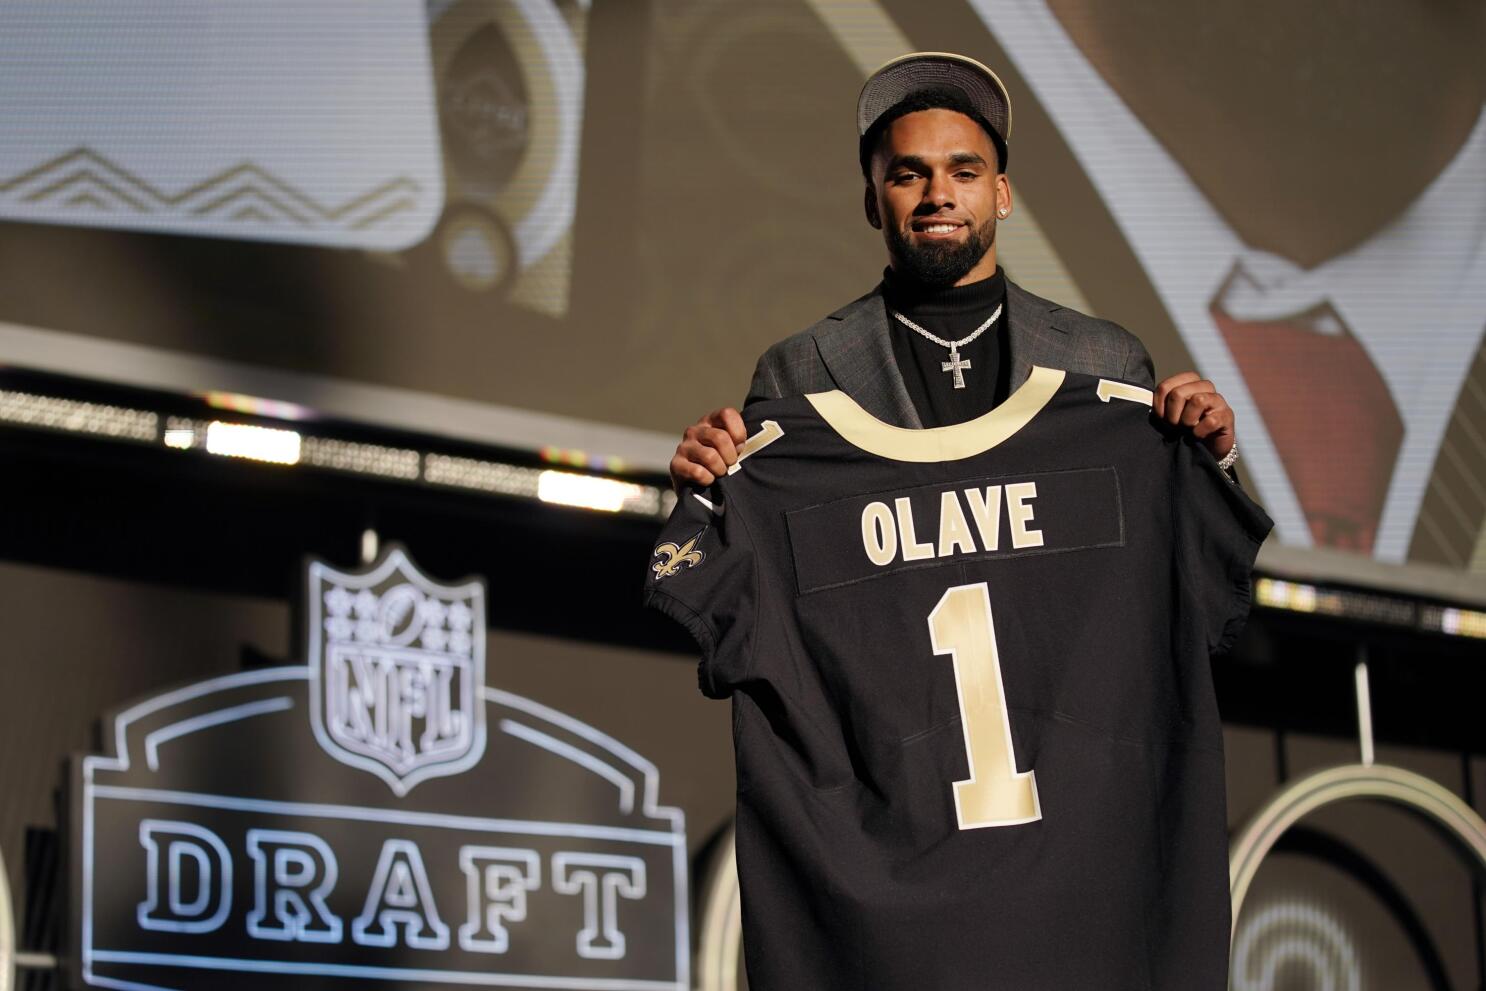 2022 NFL Draft: Chris Olave Selected No. 11 Overall By The New Orleans  Saints – Buckeye Sports Bulletin